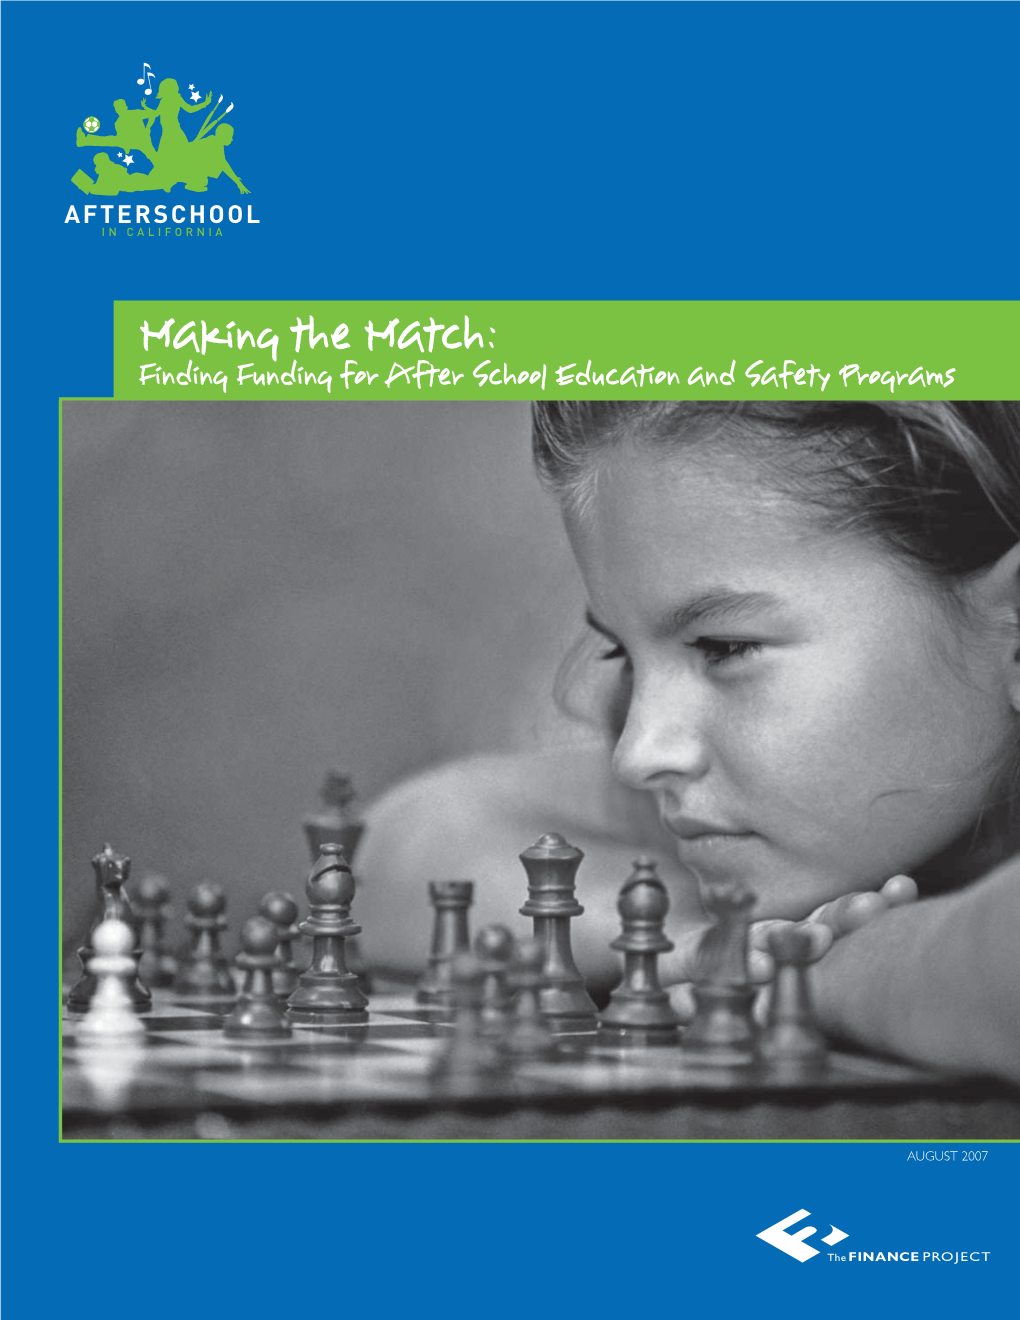 Making the Match: Finding Funding for After School Education and Safety Programs